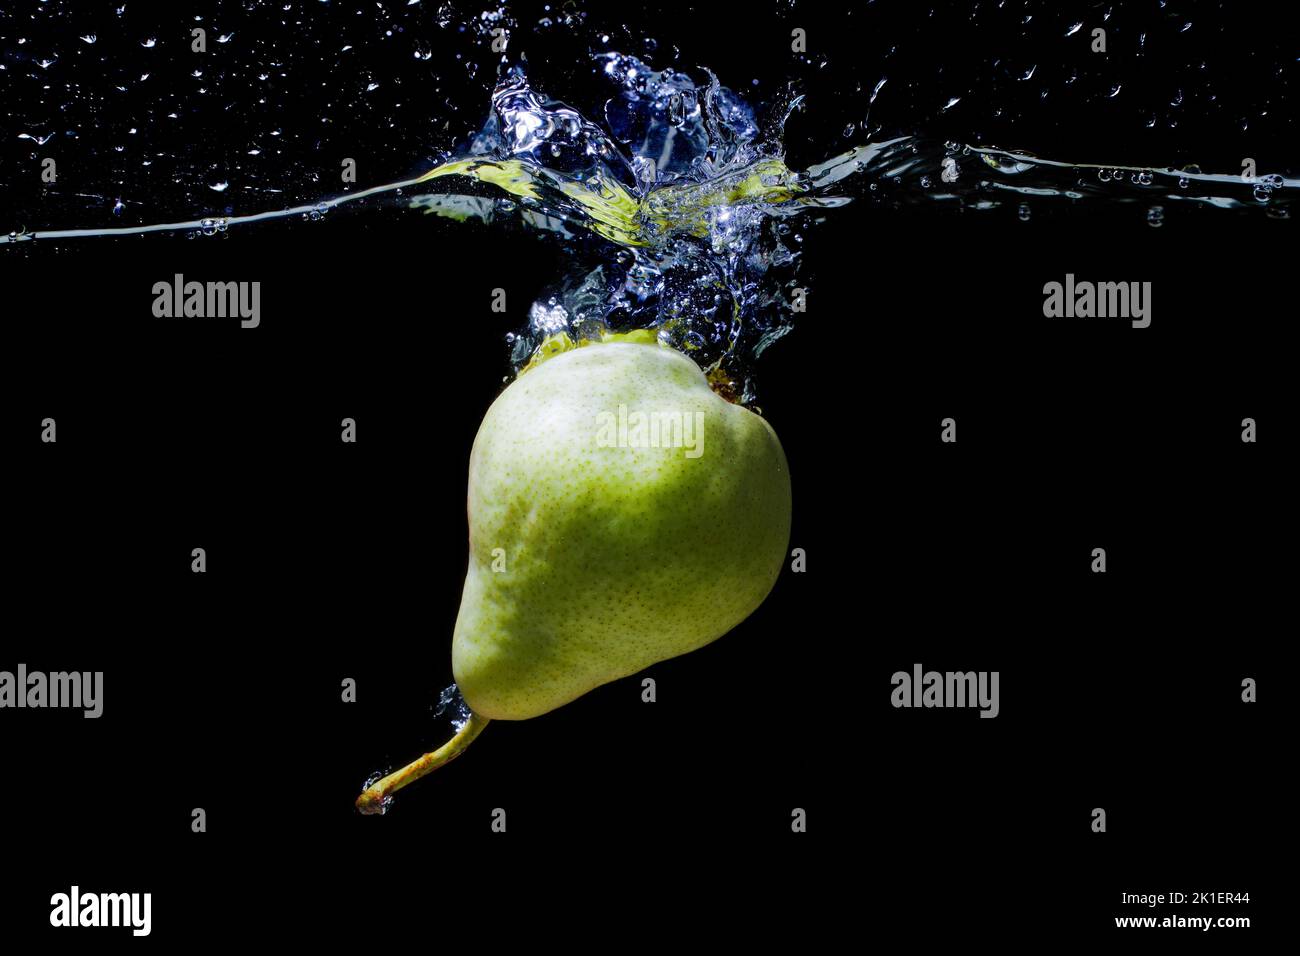 Whole green pear dropped in water with splashes isolated on black background. Stock Photo